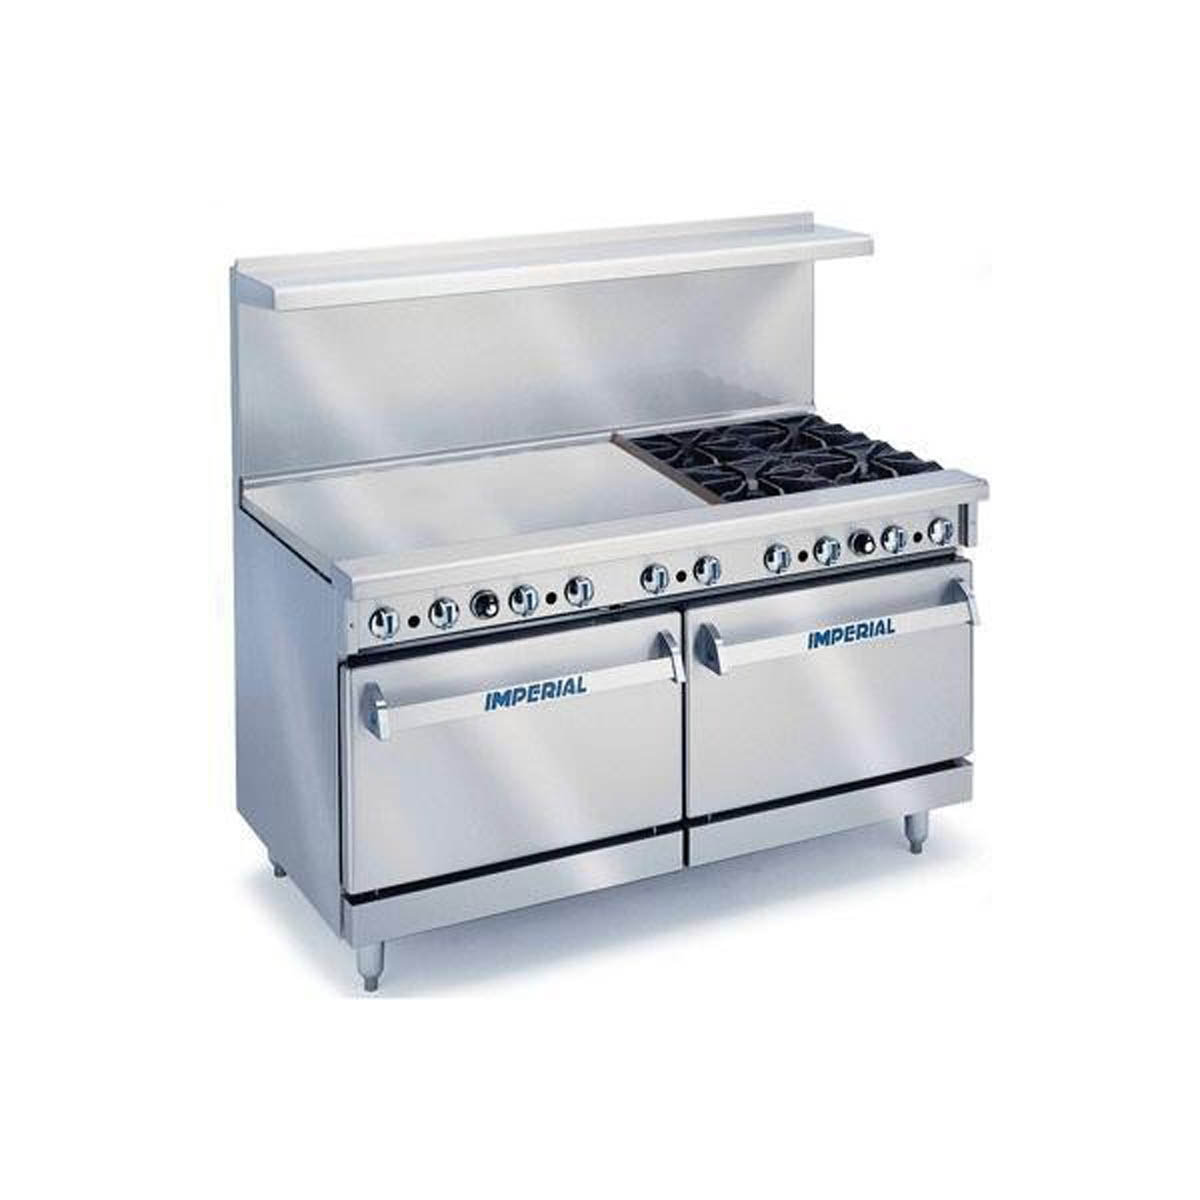 Imperial IR-4-G36-CC 60″ Gas Restaurant Range w/ 4 Open Burners, 36″ Griddle, 2 Convection Ovens